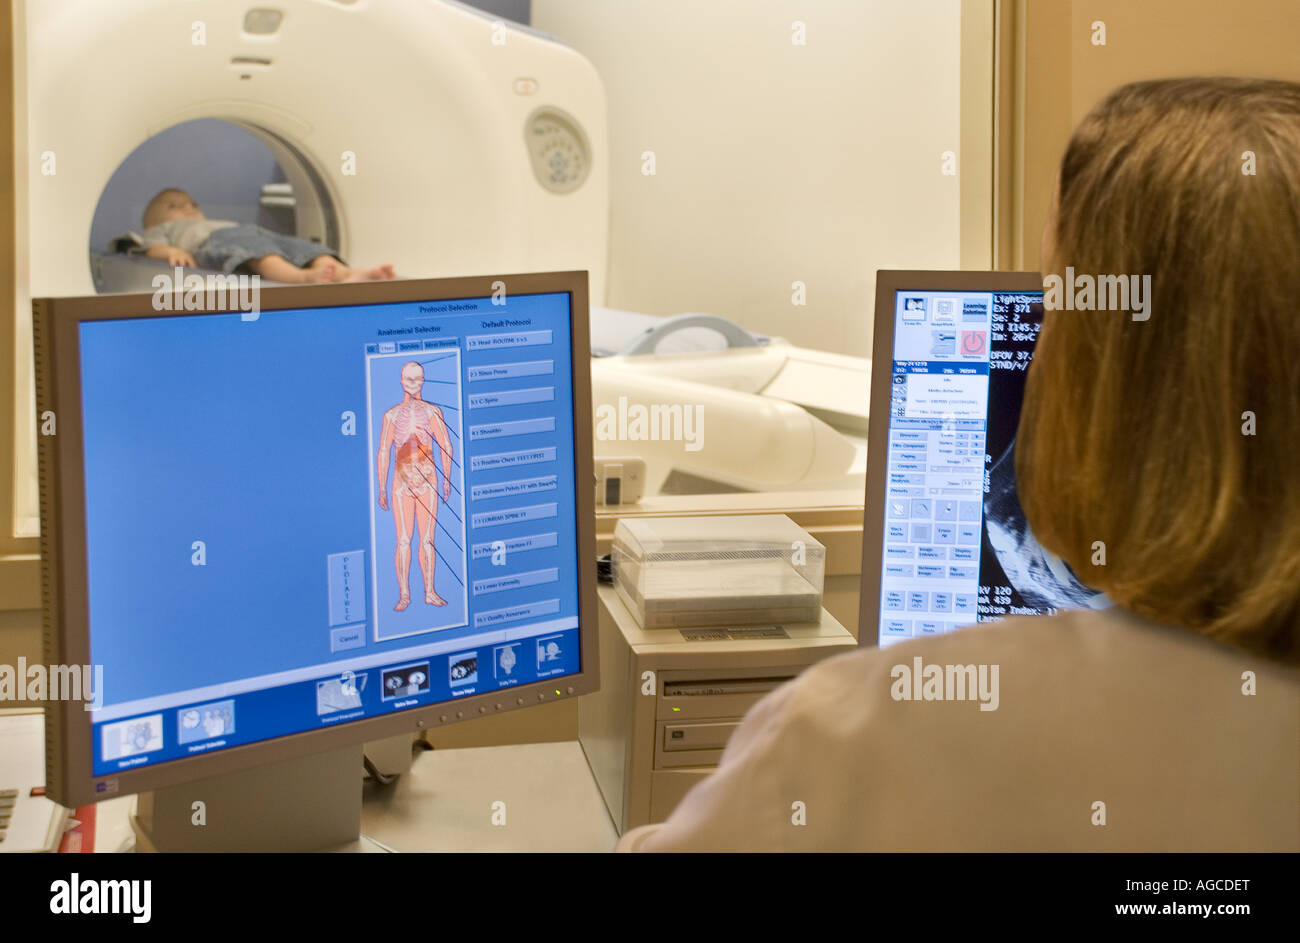 Young boy having CAT scan in hospital scanning suite from point of view of technician Stock Photo